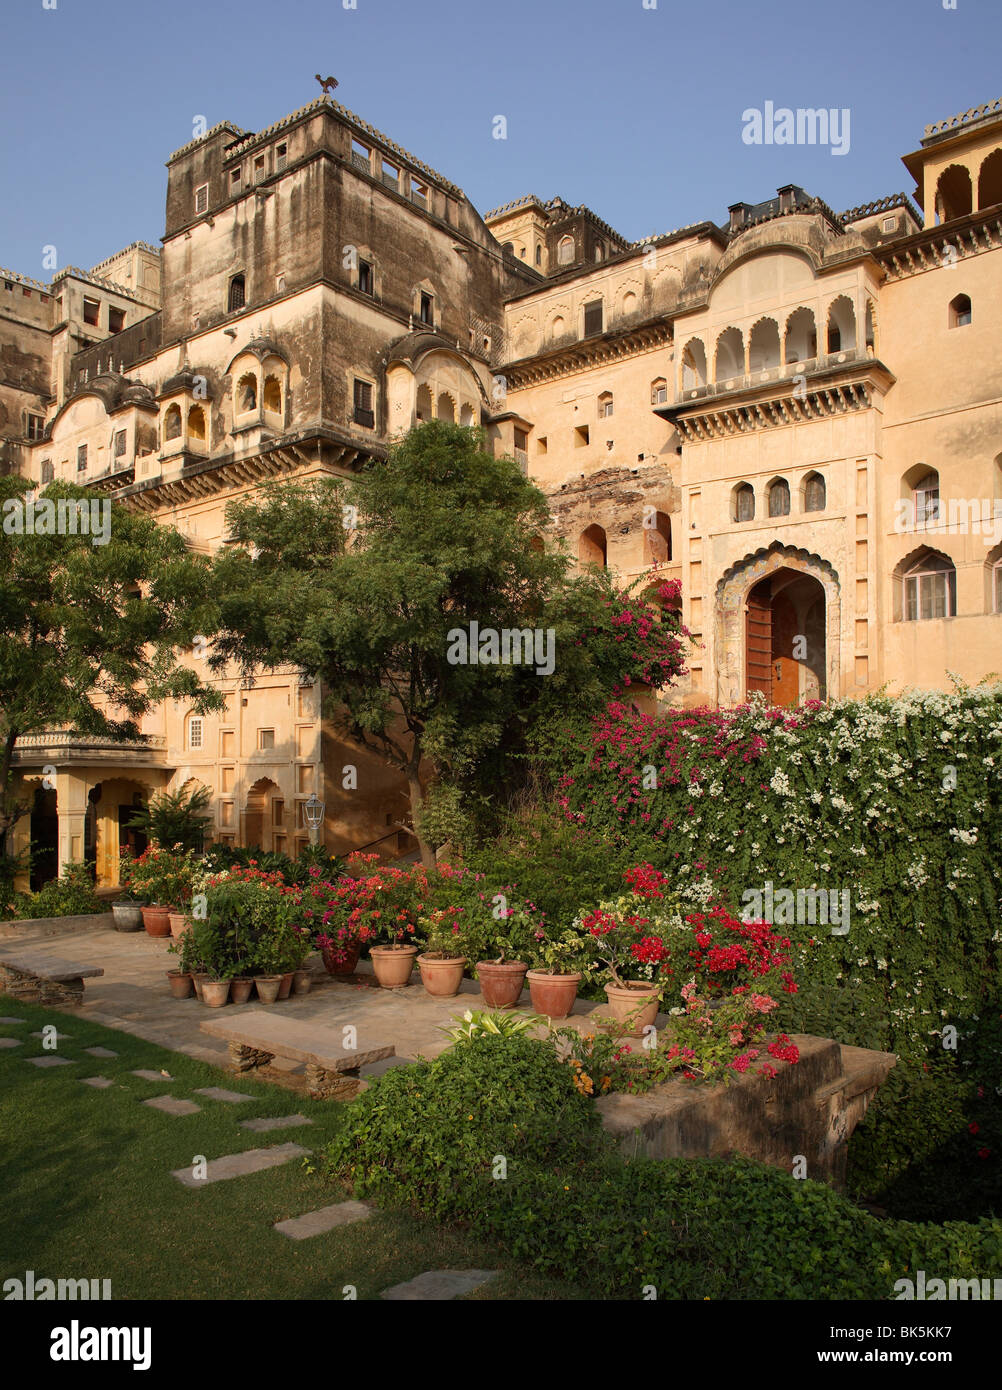 The exterior of the Neemrana Fort Palace painted in ochre tones and sporting a profusion of jarokhas, Neemrana, Rajasthan, India Stock Photo